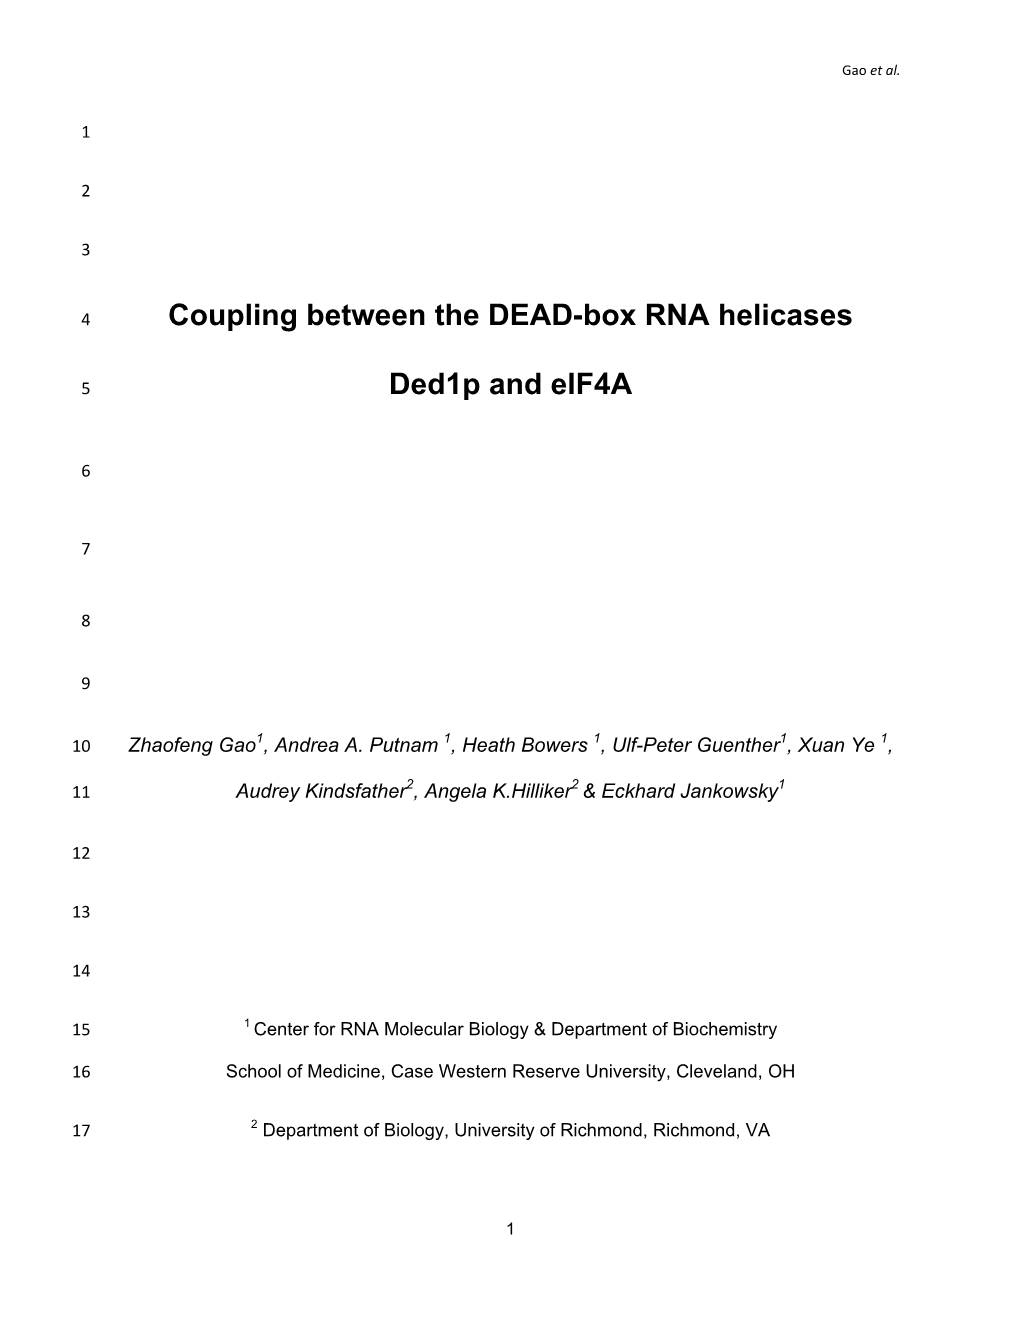 Coupling Between the DEAD-Box RNA Helicases Ded1p and Eif4a